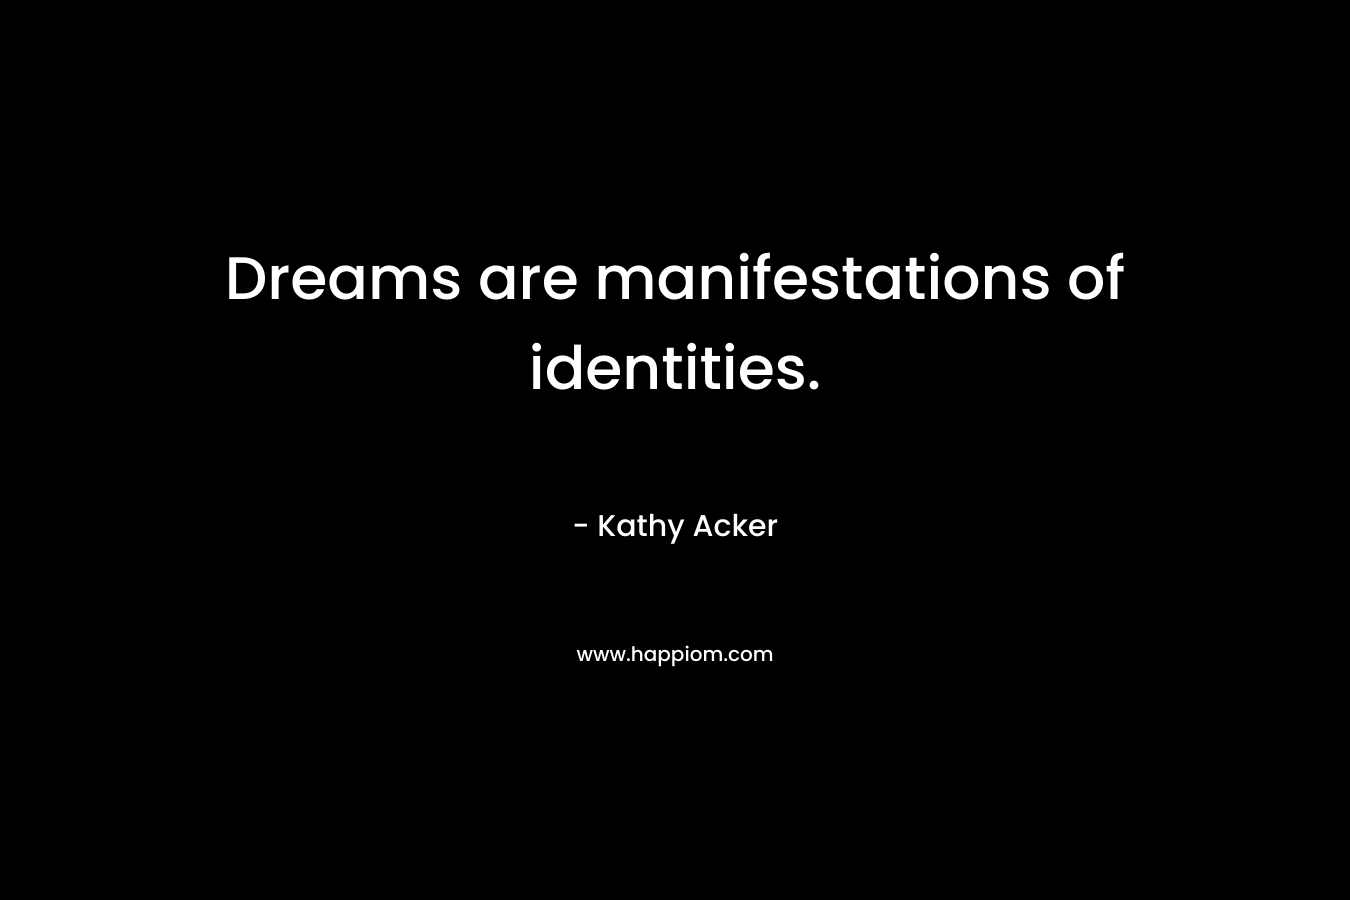 Dreams are manifestations of identities. – Kathy Acker